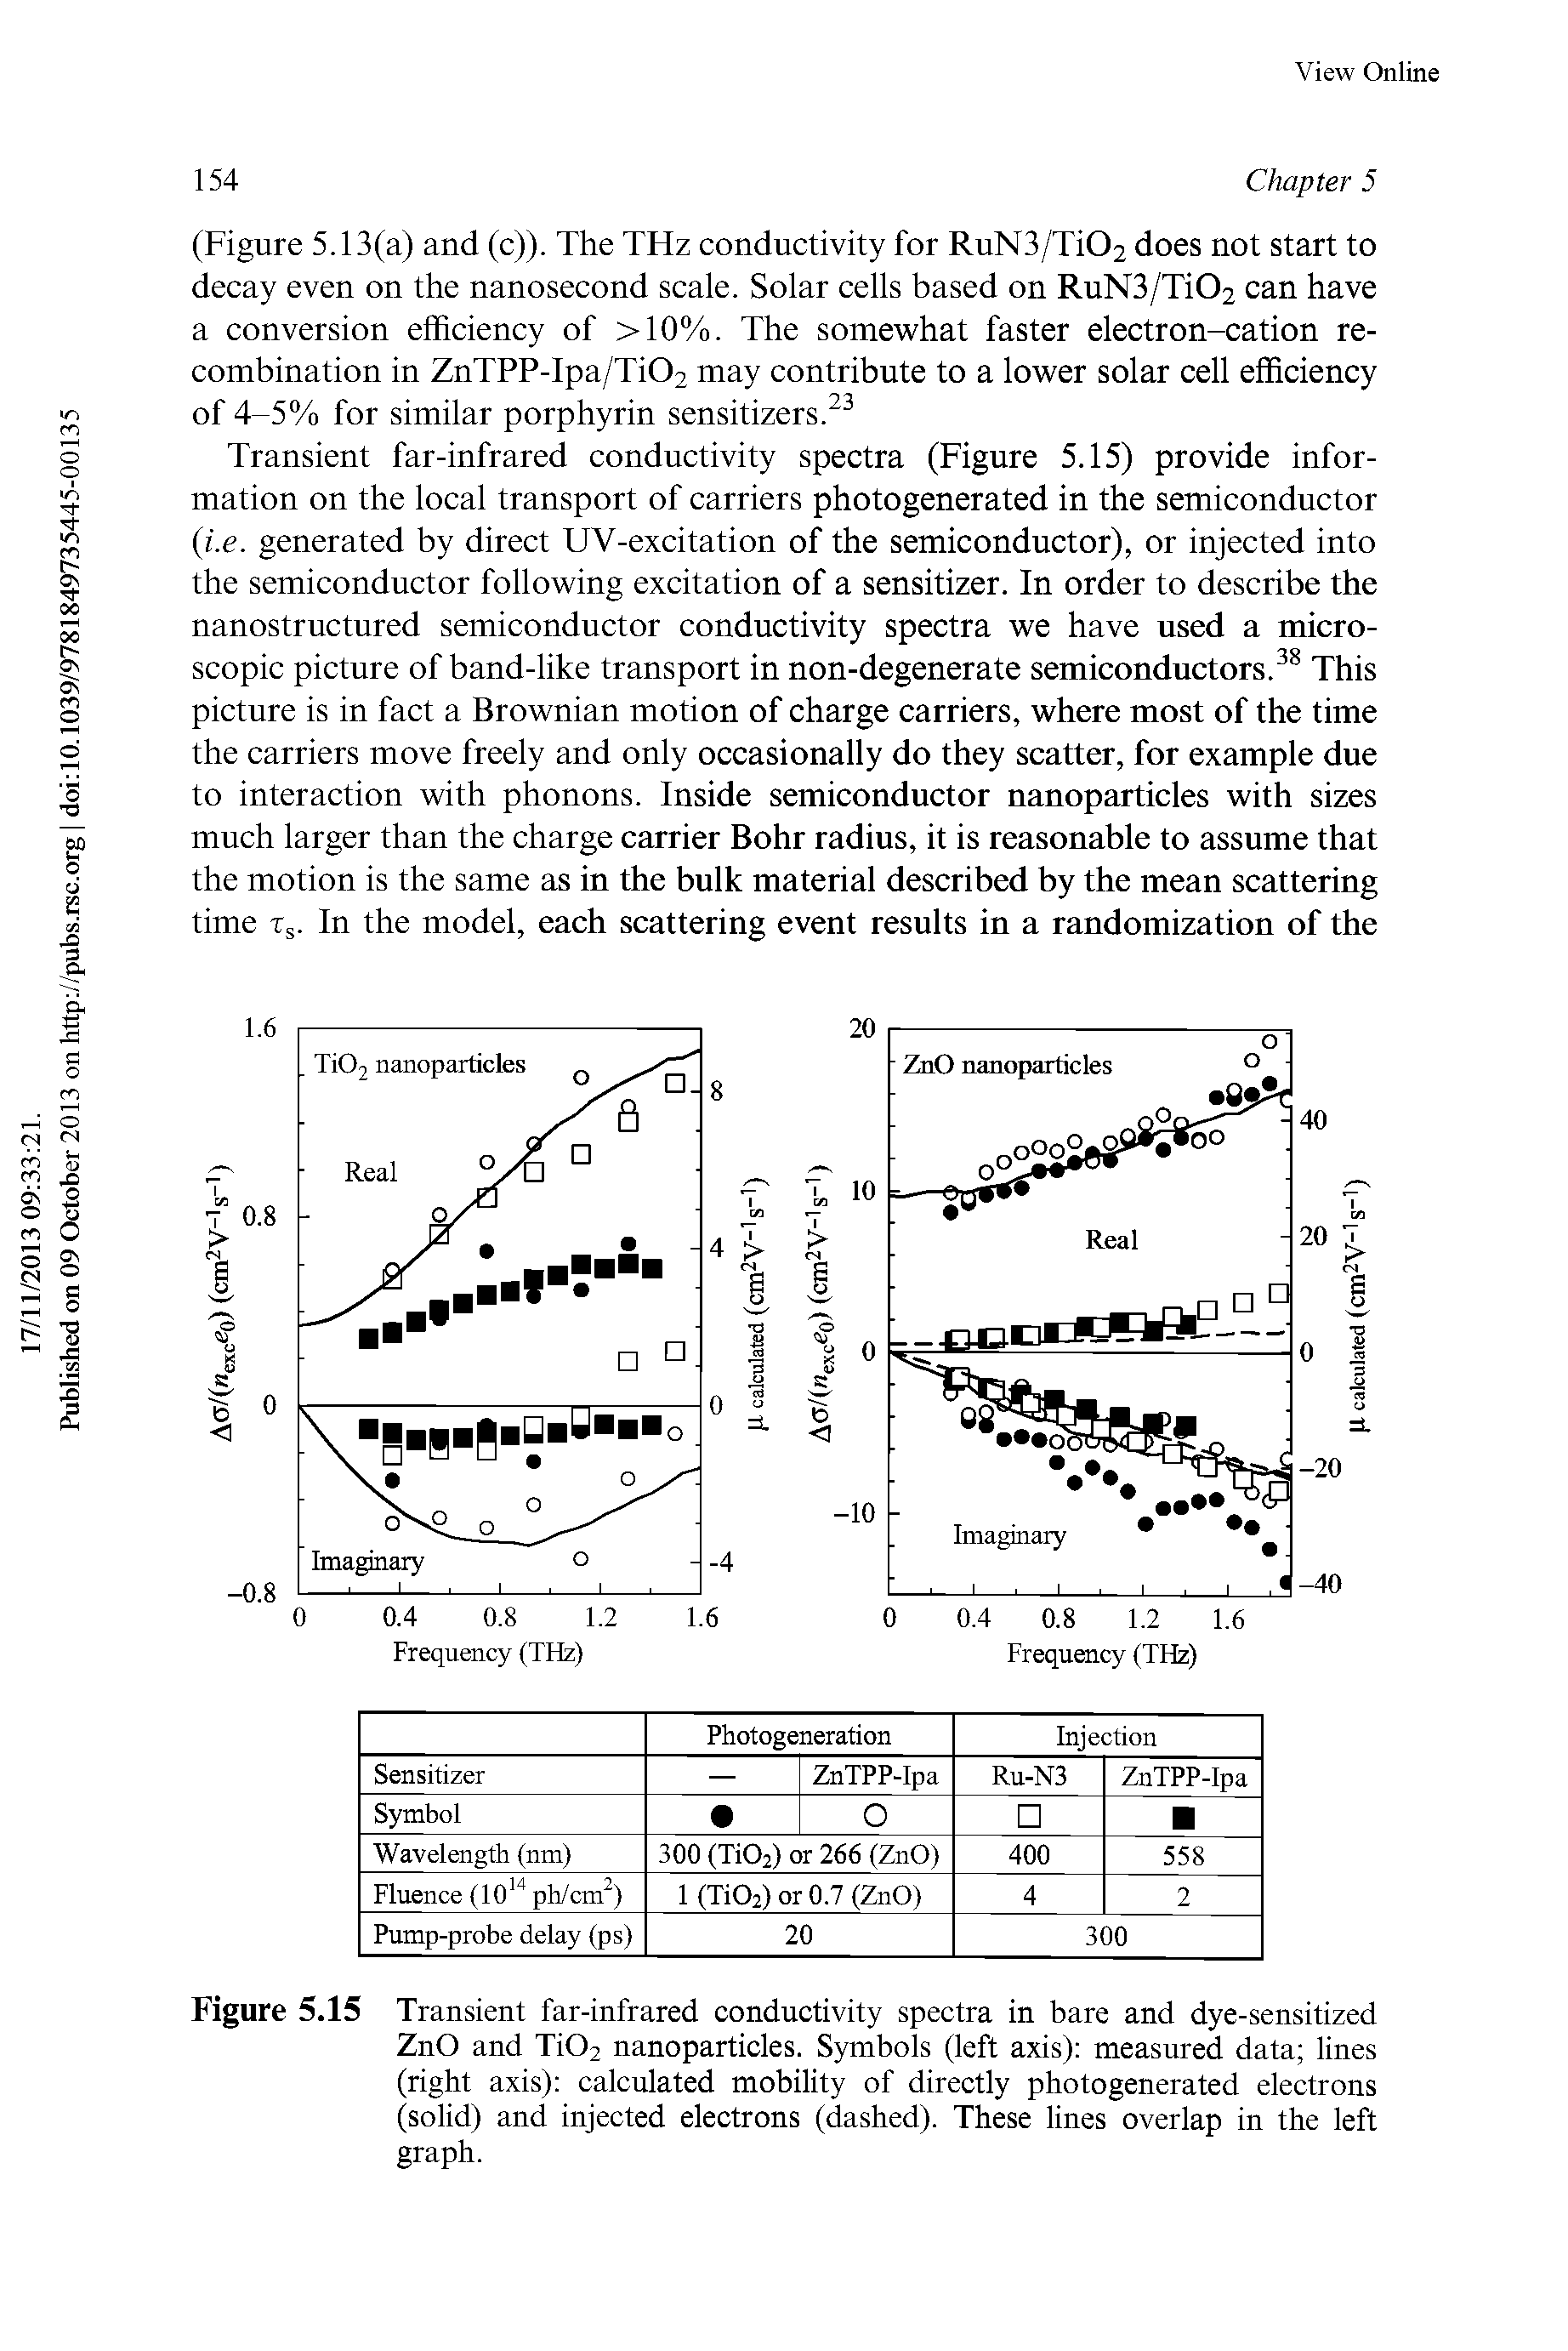 Figure 5.15 Transient far-infrared conductivity spectra in bare and dye-sensitized ZnO and Ti02 nanoparticles. Symbols (left axis) measured data lines (right axis) calculated mobility of directly photogenerated electrons (solid) and injected electrons (dashed). These lines overlap in the left graph.